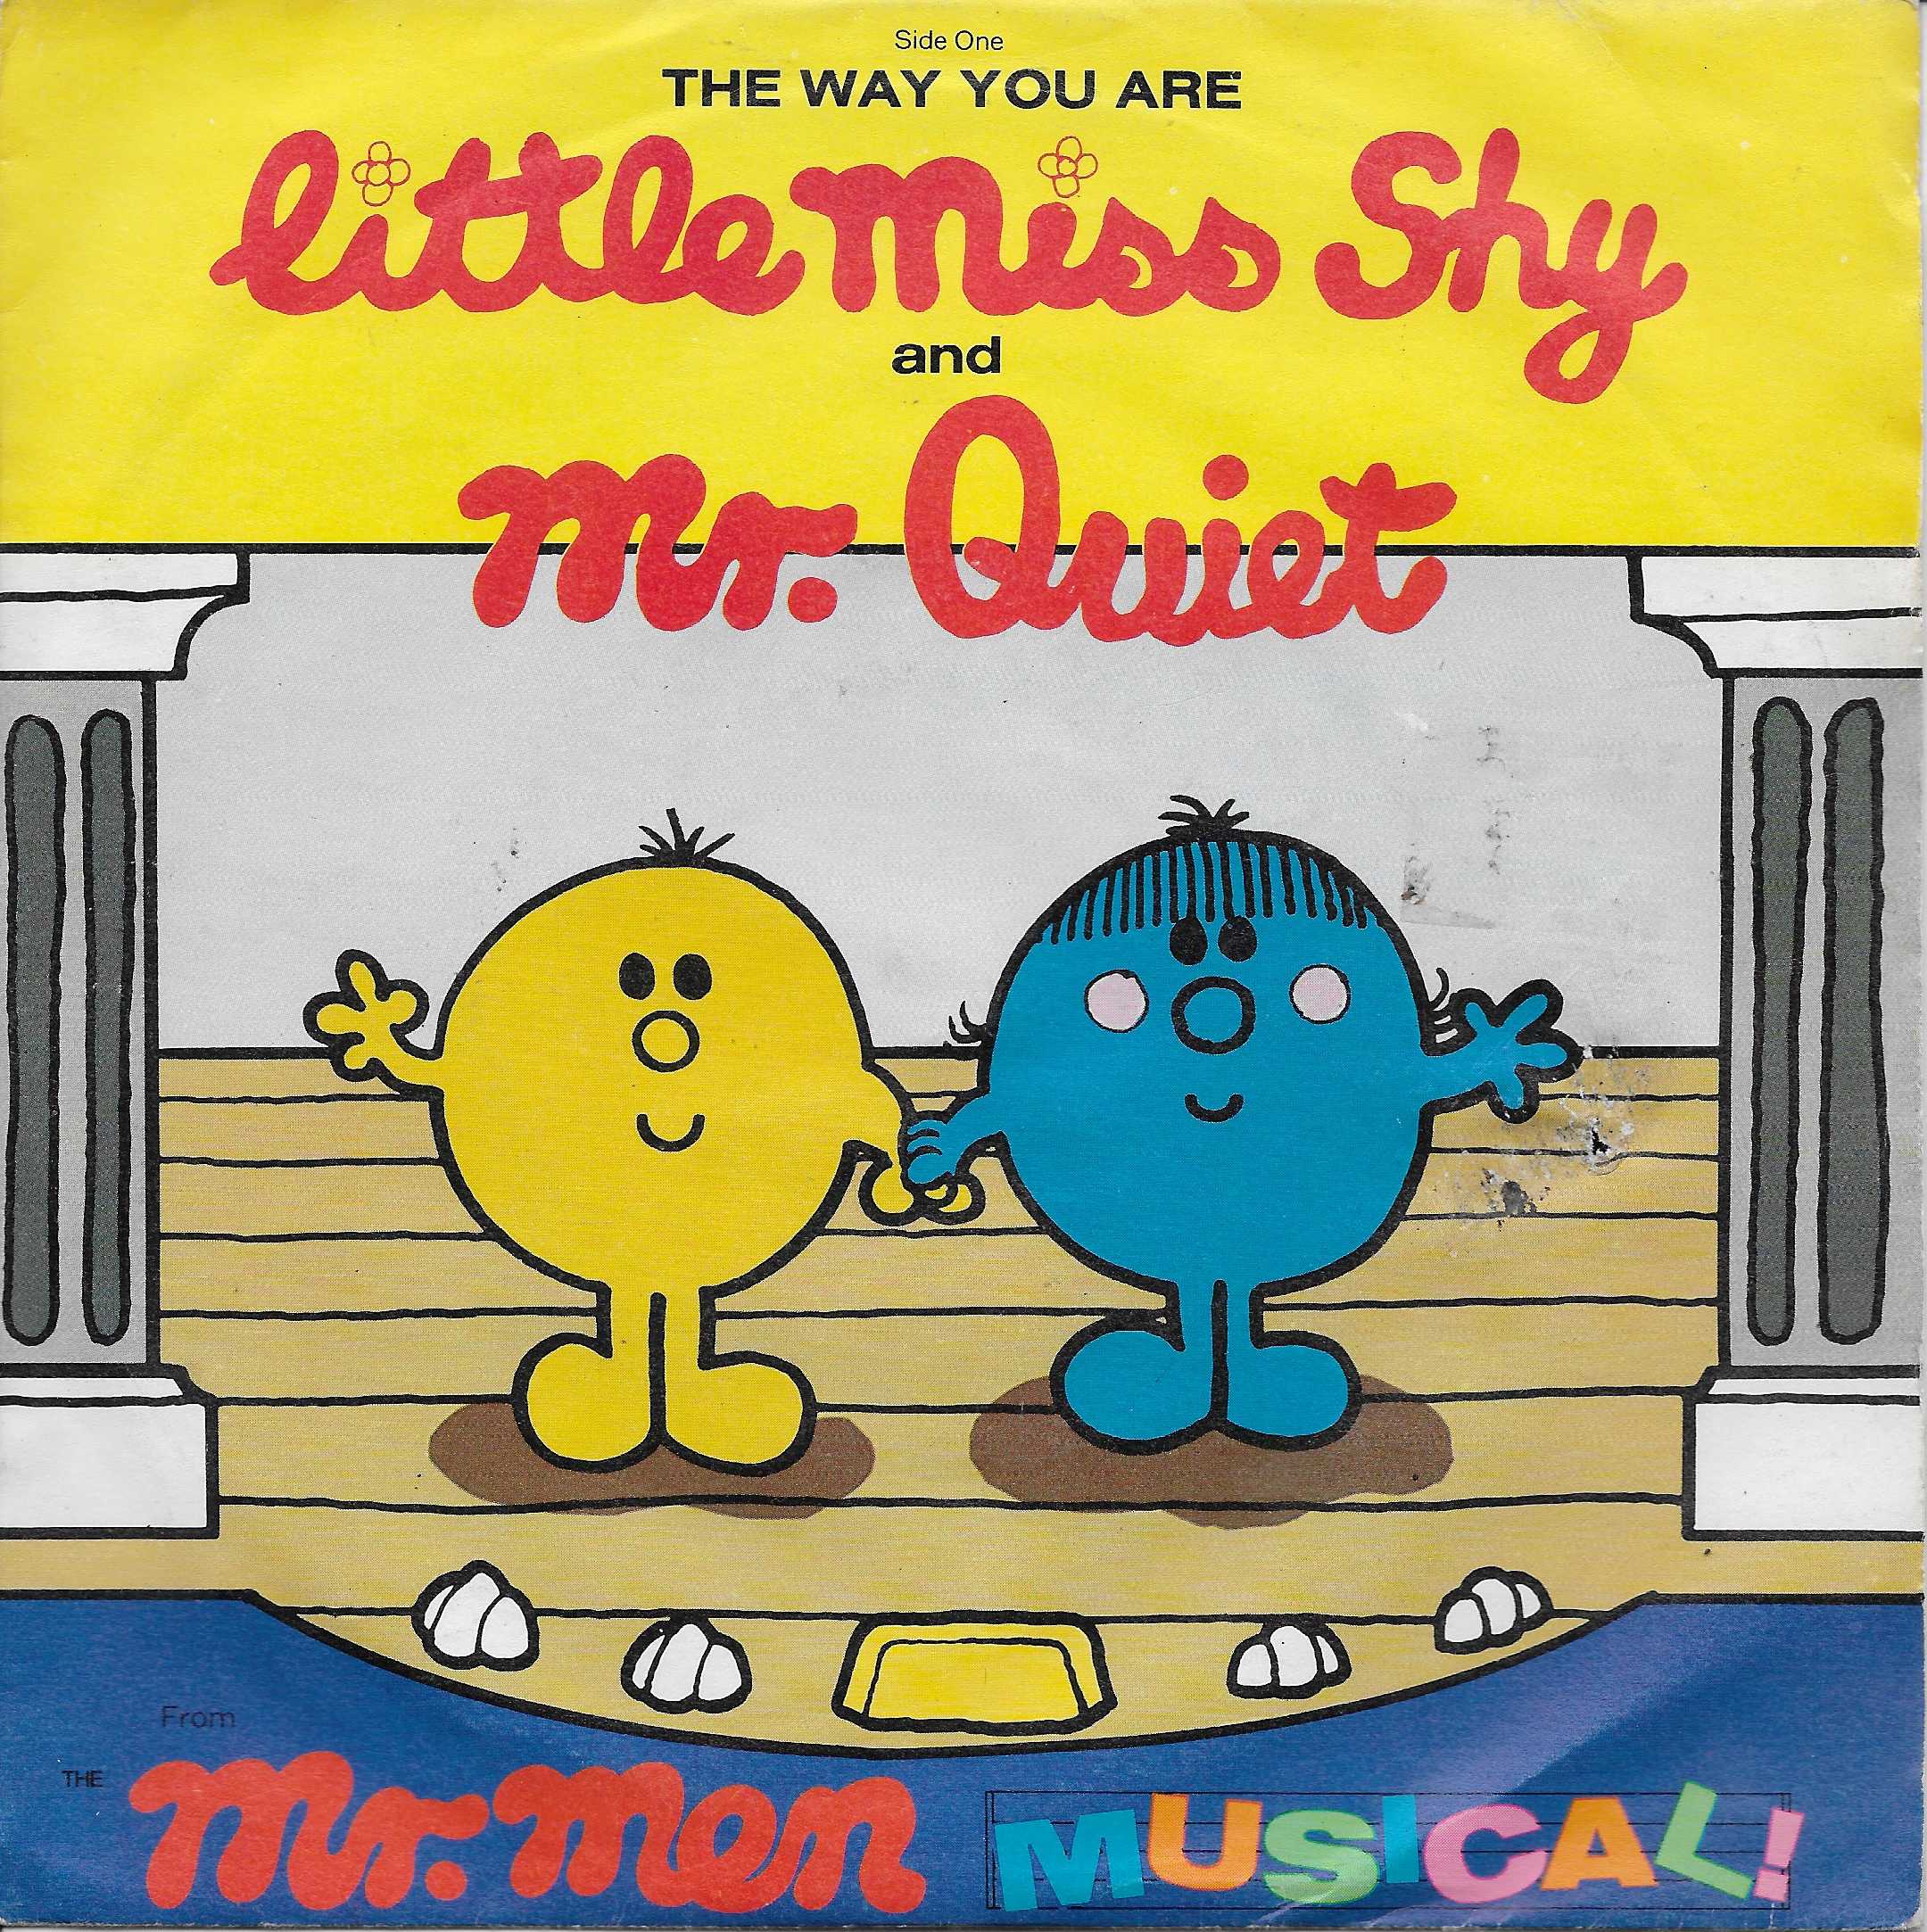 Picture of SAFEMR 69 Mister men - Mr Quiet, Little Miss Shy by artist Roger Hargreaves from the BBC records and Tapes library